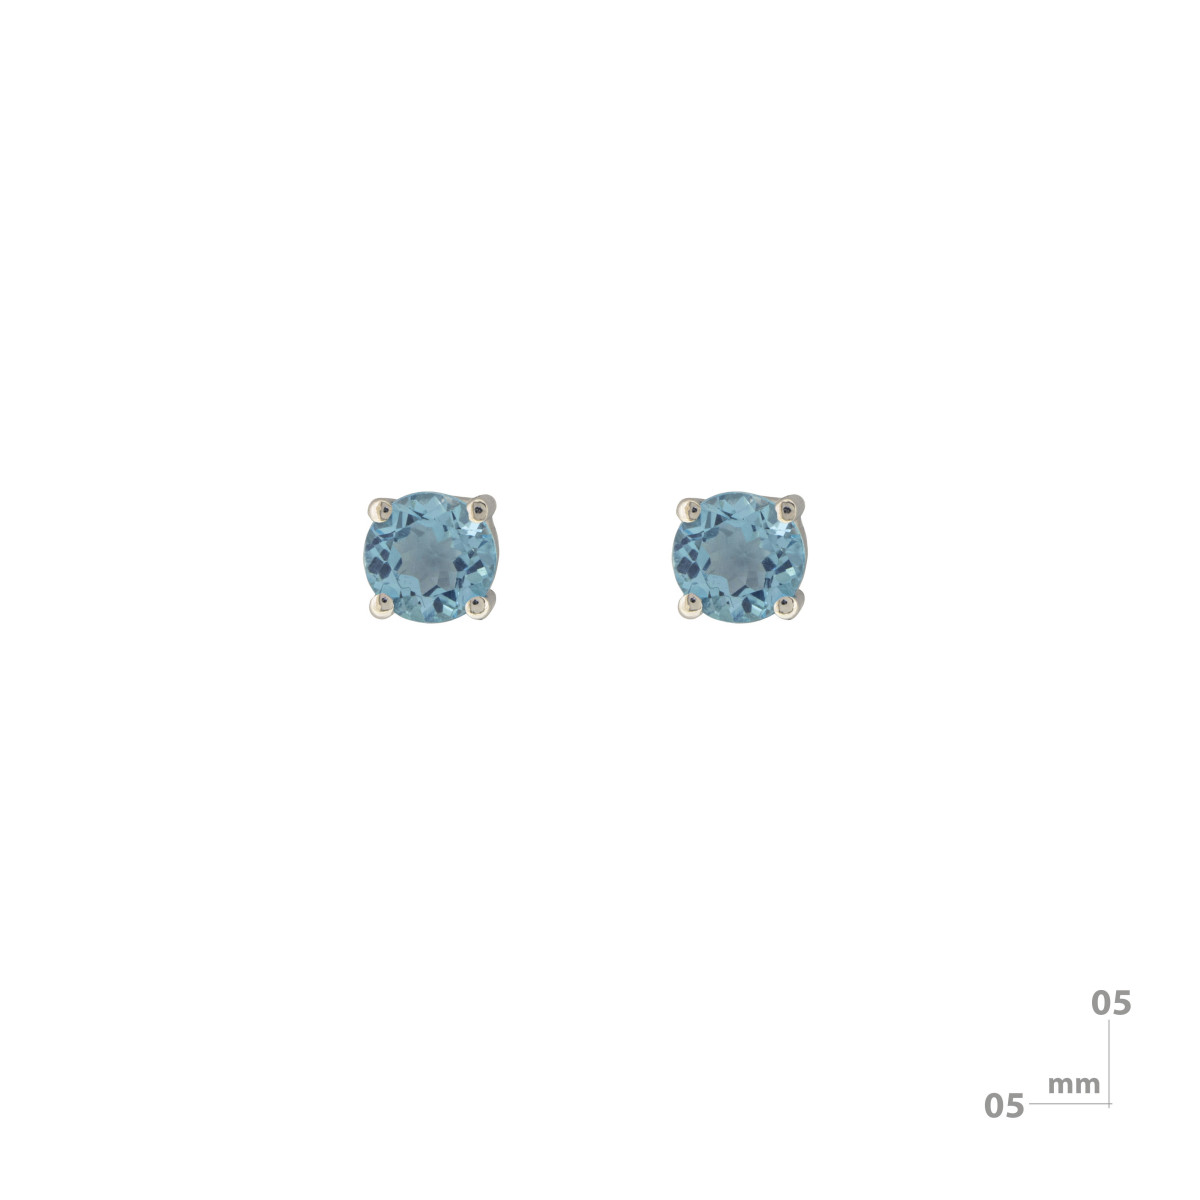 Silver, gold and blue topaz earrings